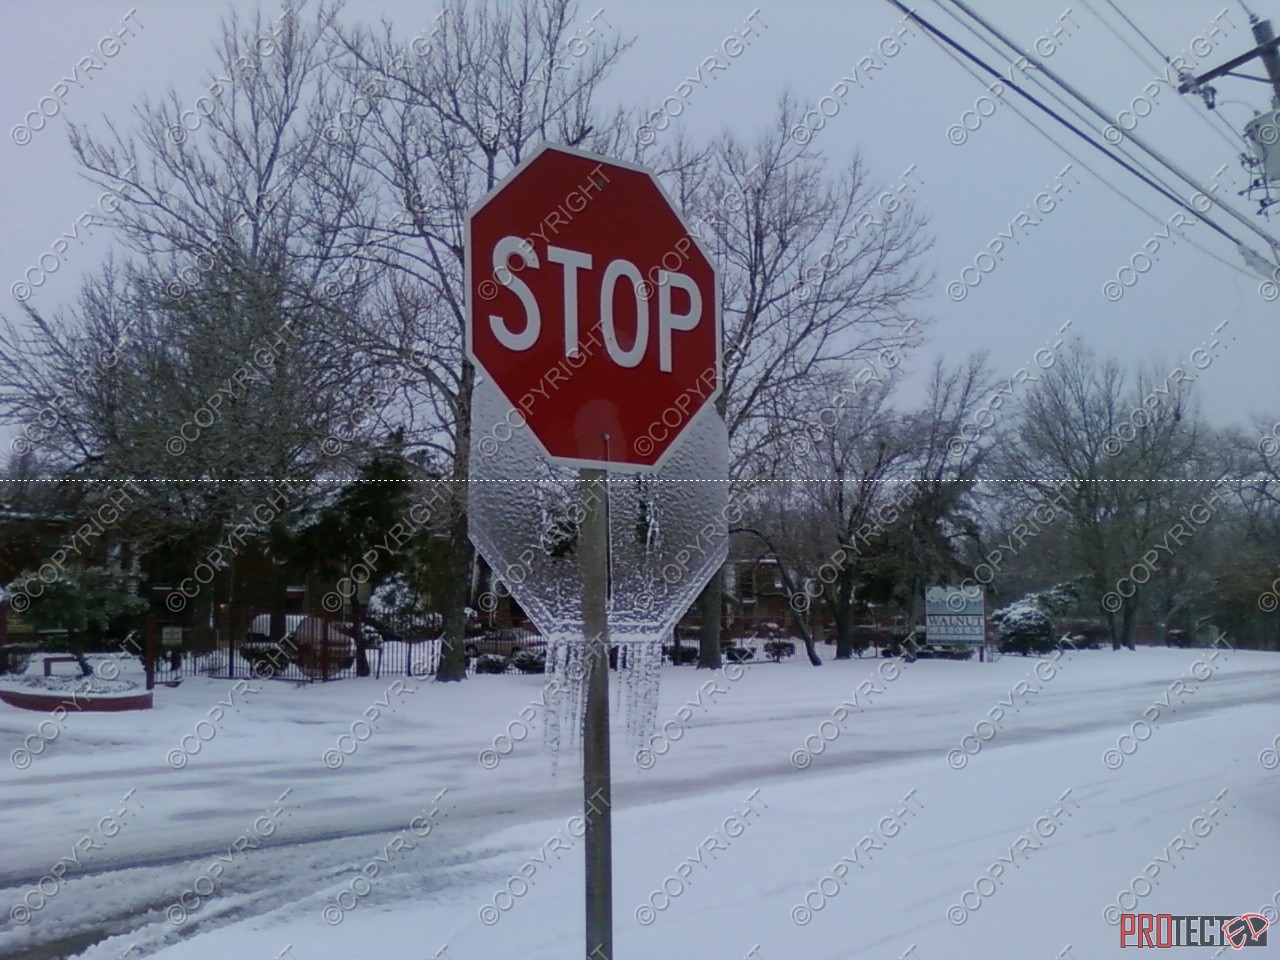 This is a pic I took in the snow and ice storm in January